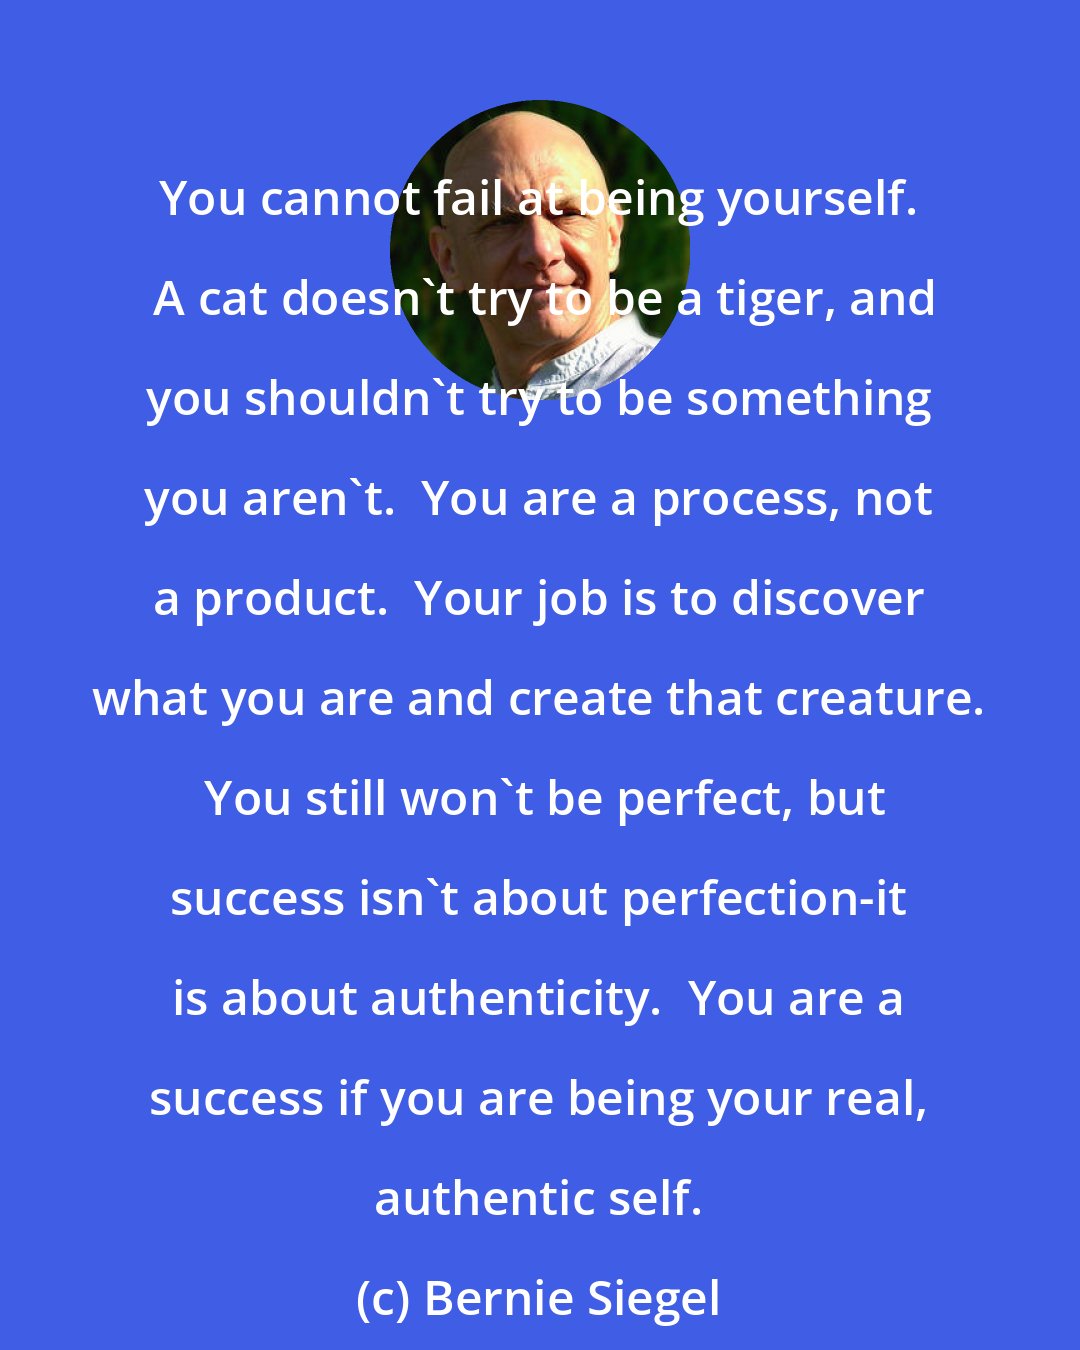 Bernie Siegel: You cannot fail at being yourself.  A cat doesn't try to be a tiger, and you shouldn't try to be something you aren't.  You are a process, not a product.  Your job is to discover what you are and create that creature.  You still won't be perfect, but success isn't about perfection-it is about authenticity.  You are a success if you are being your real, authentic self.